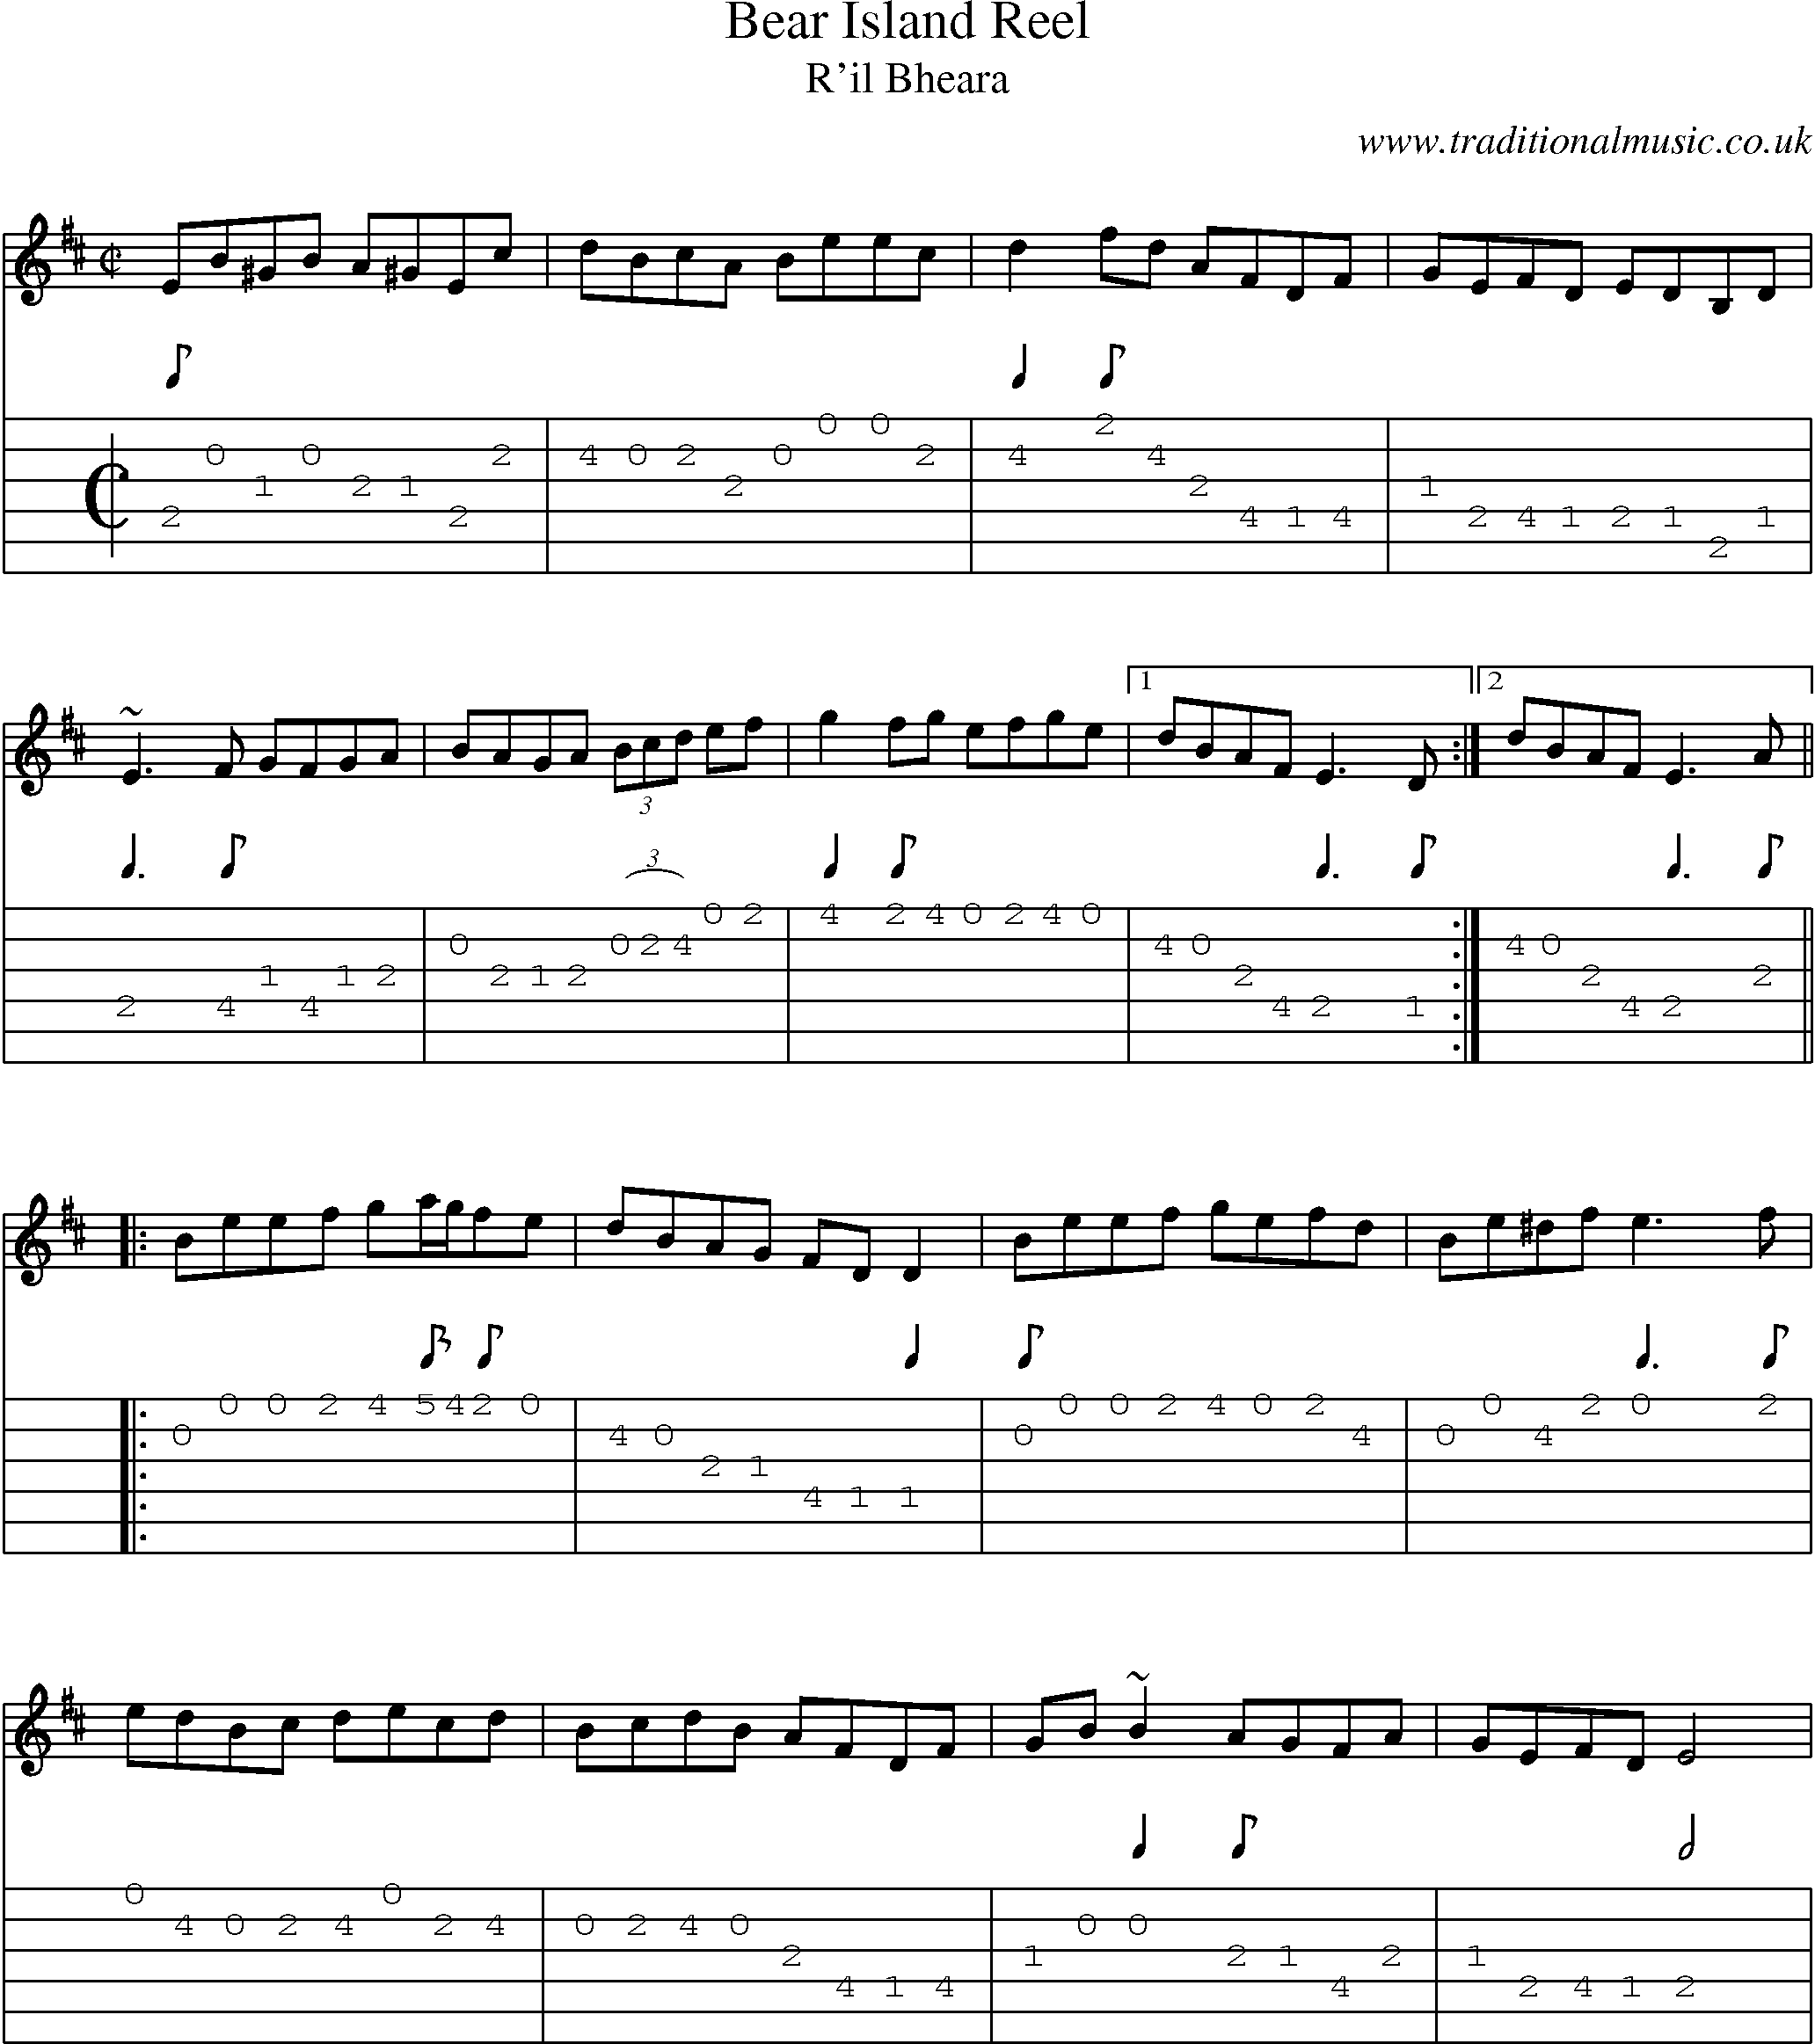 Music Score and Guitar Tabs for Bear Island Reel